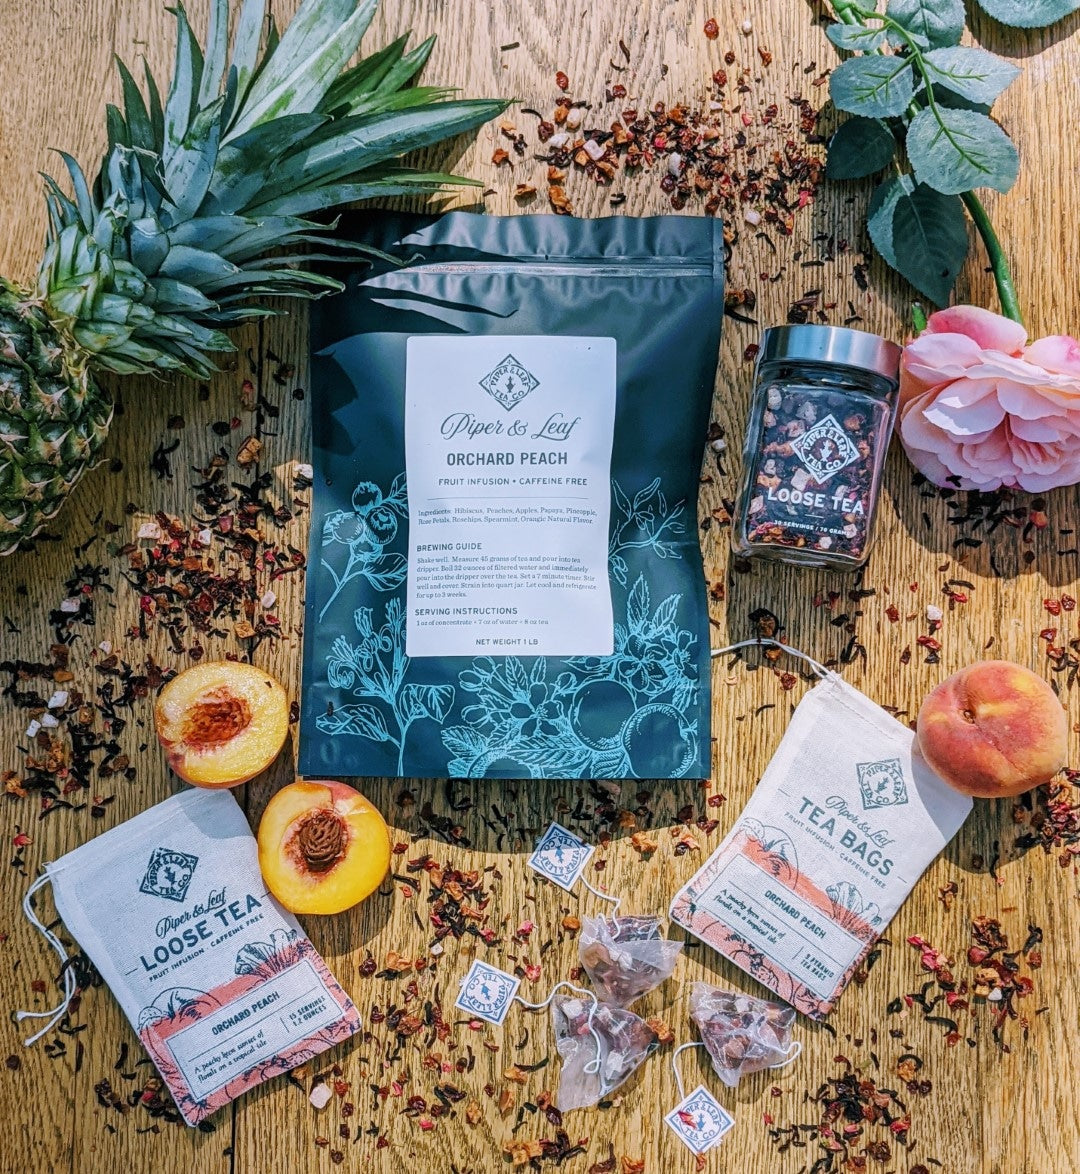 A vibrant pineapple and a Piper & Leaf Tea Co. Orchard Peach Pound Bag - 190 servings on a wooden table.